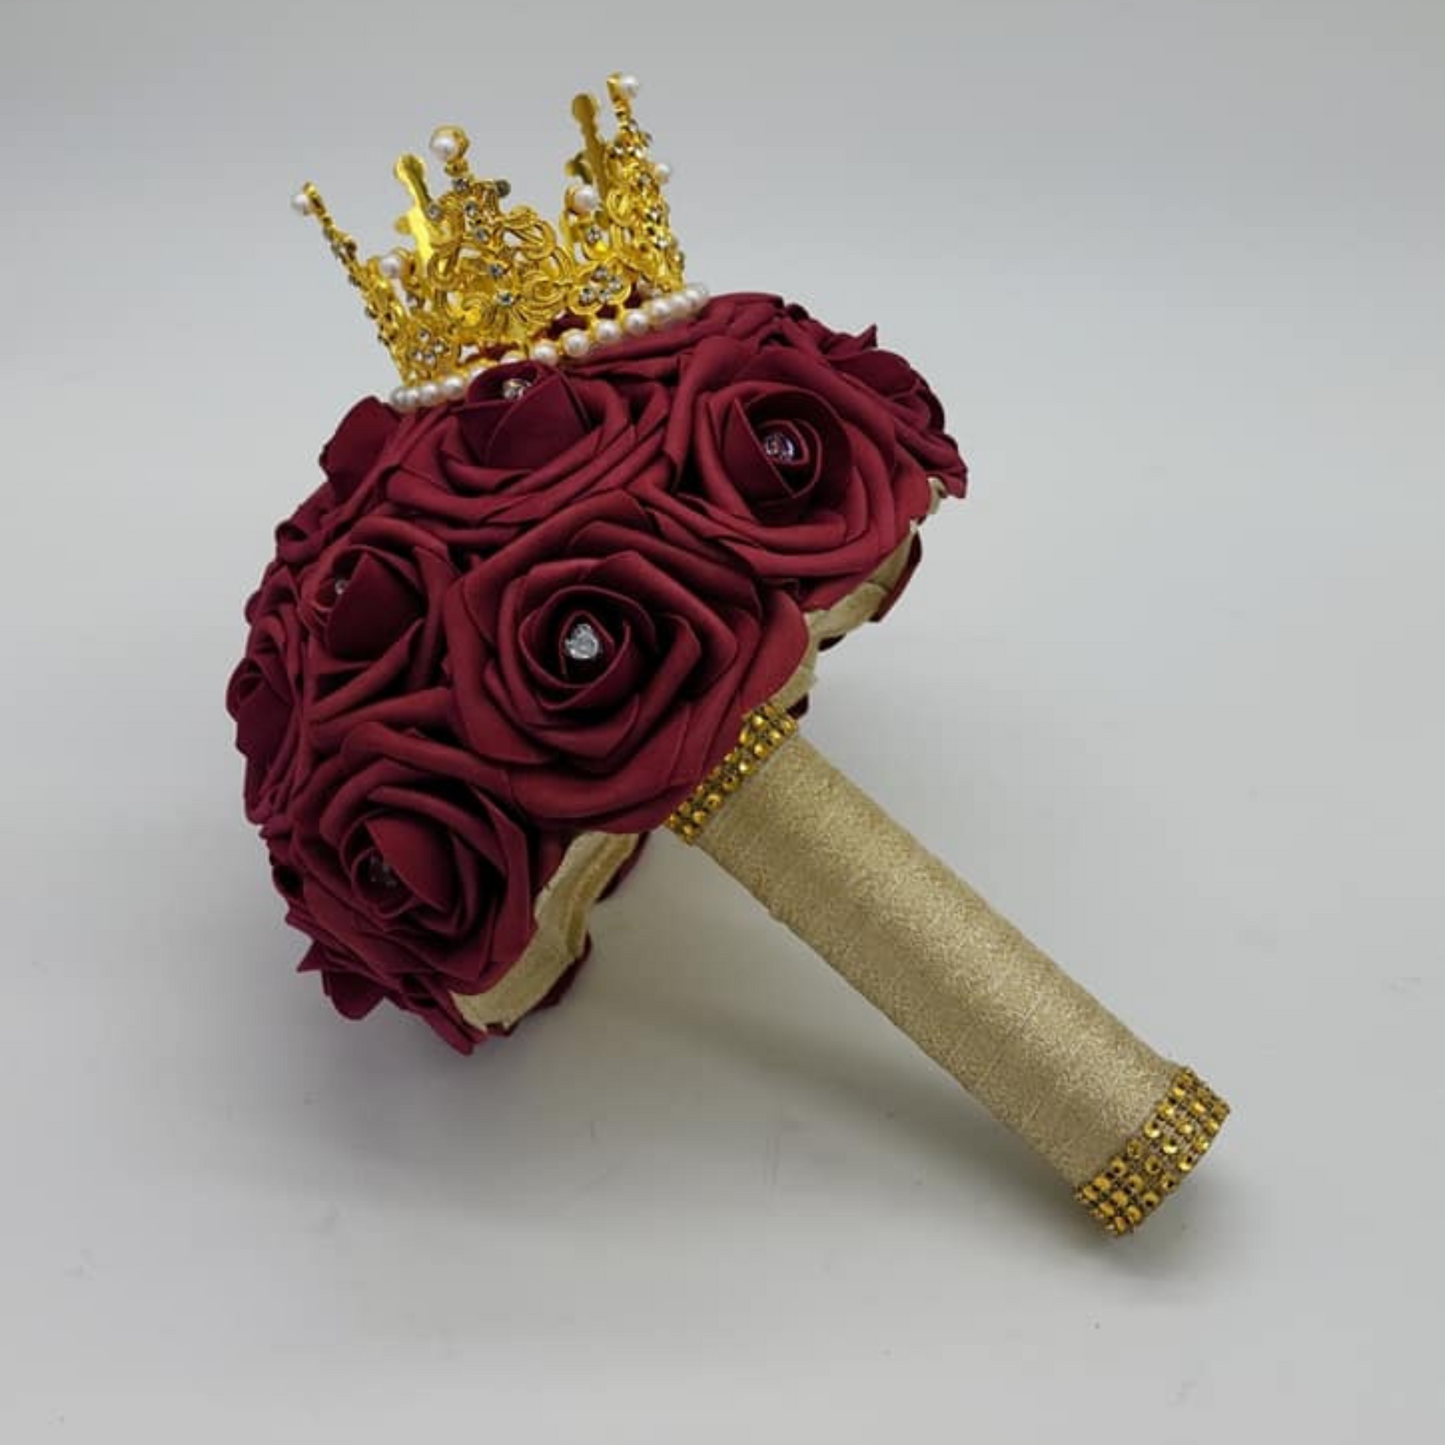 burgundy and gold bridal bouquet with gold crown and heart charms on flowers